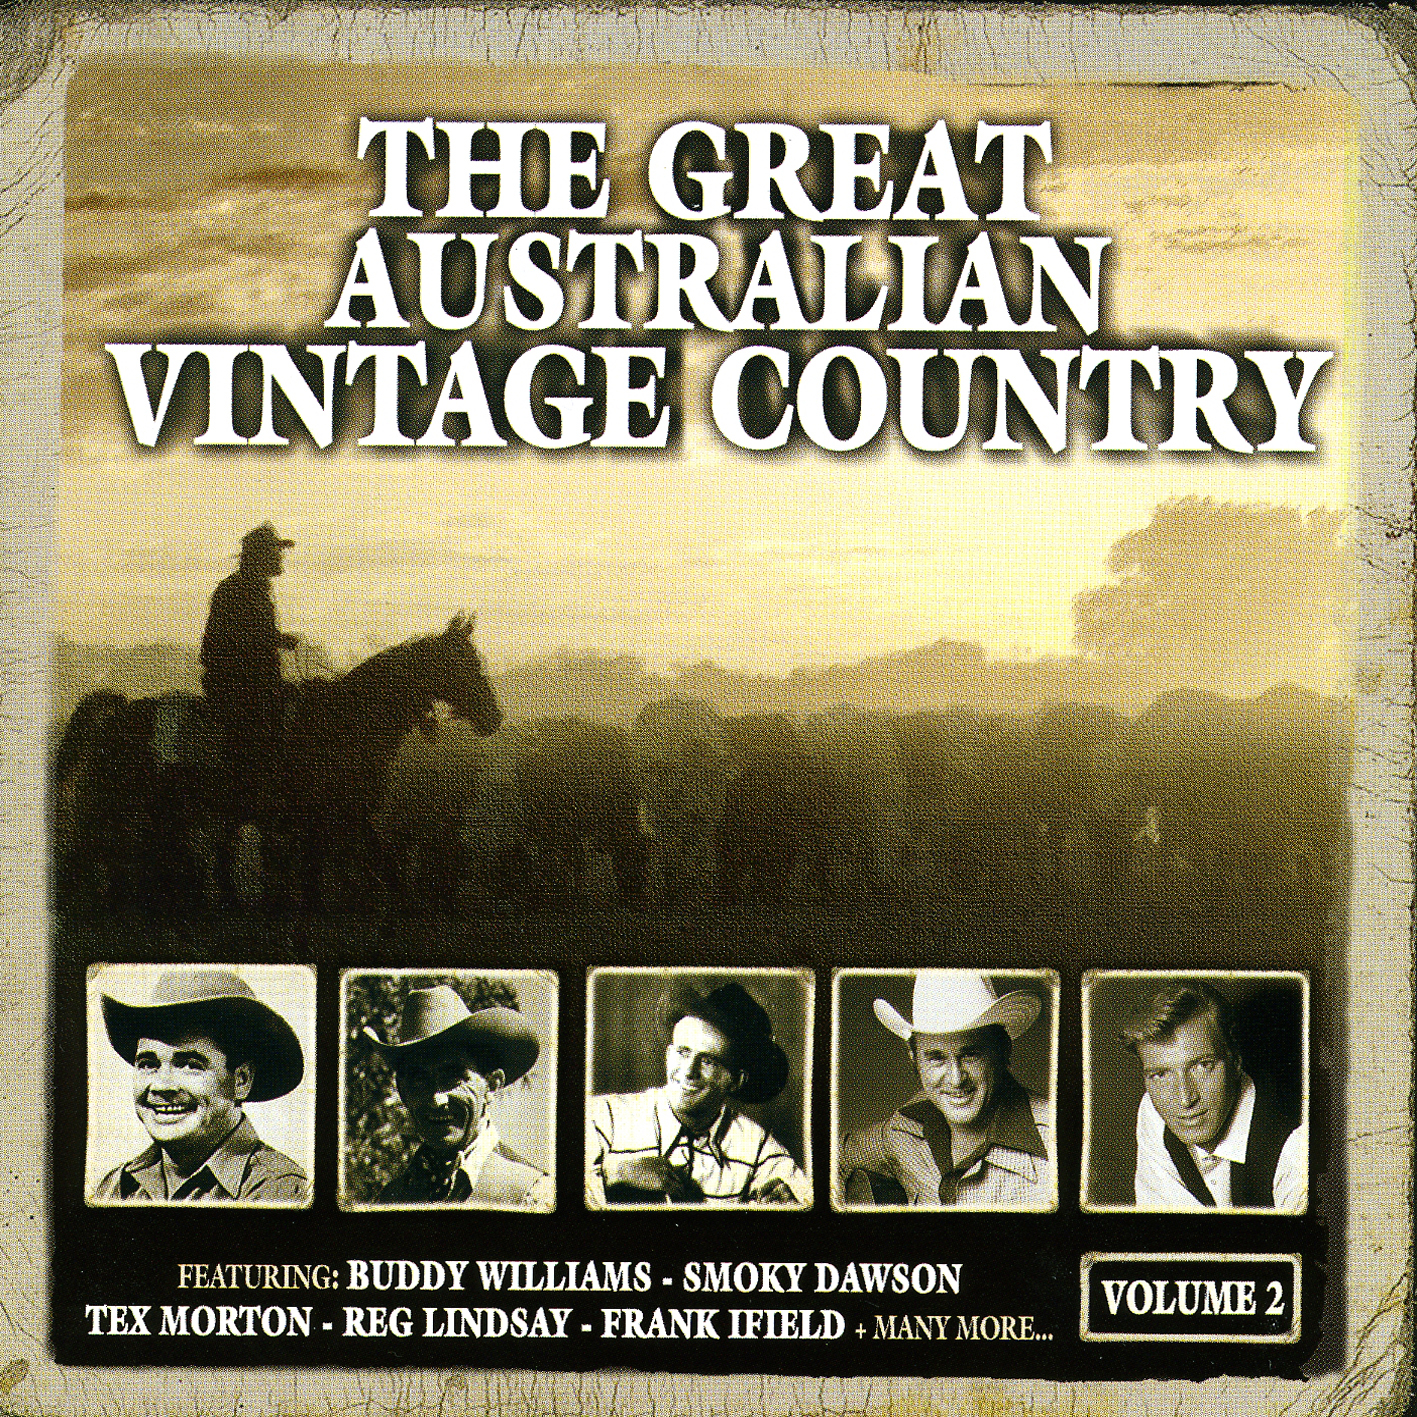 The Great Australian Vintage Country Volume Two